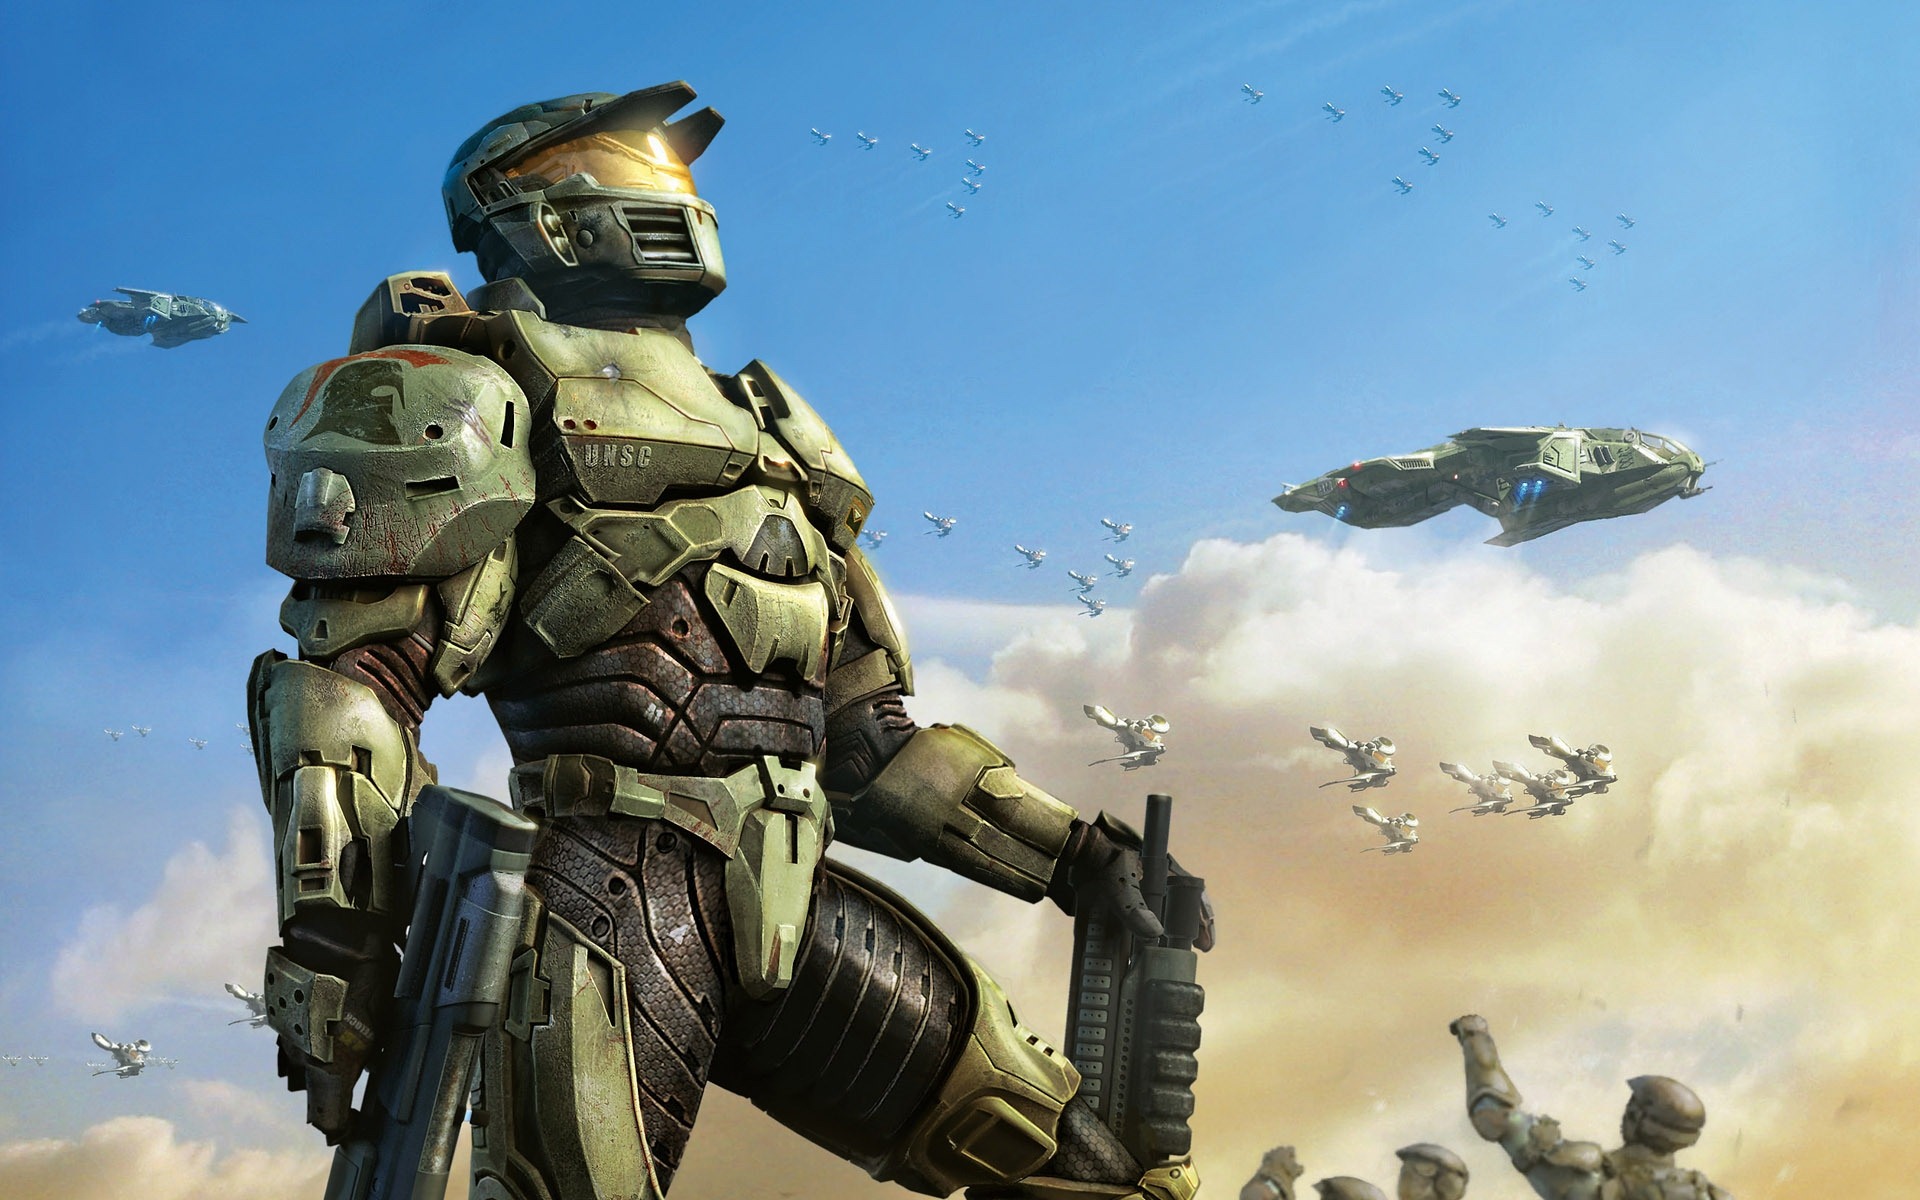 Halo game HD wallpapers #3 - 1920x1200